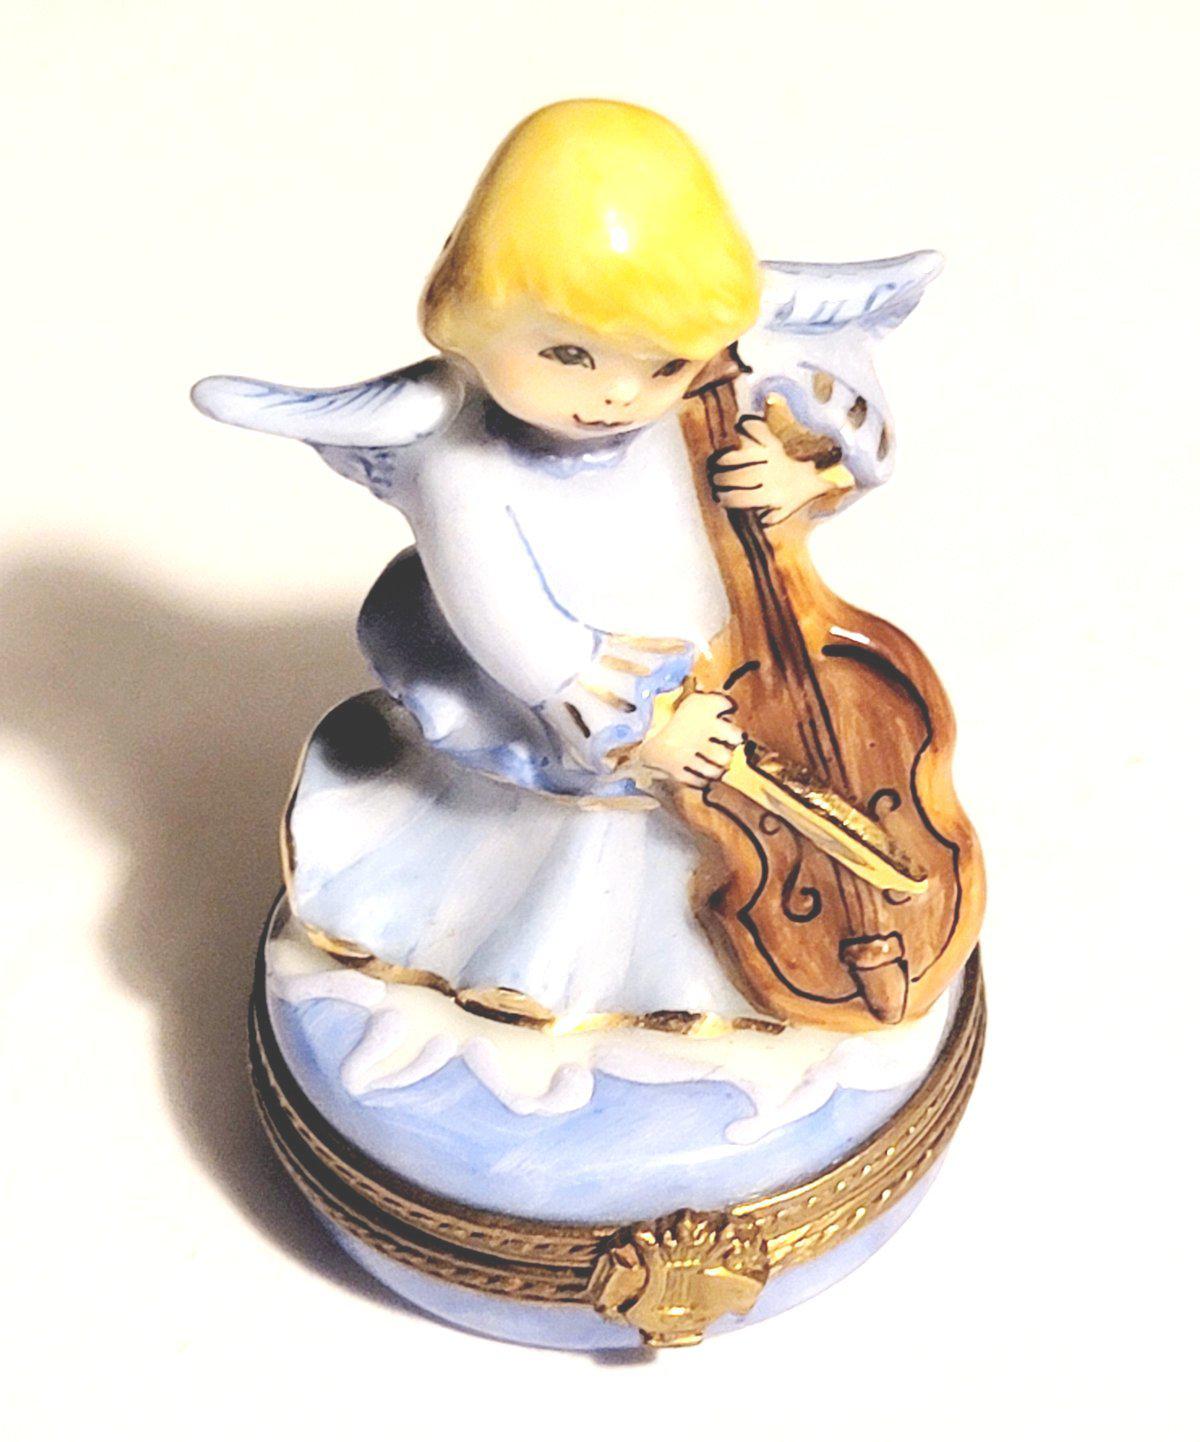 Angel playing a rare and gorgeous 375 cello figurine in exquisite detail